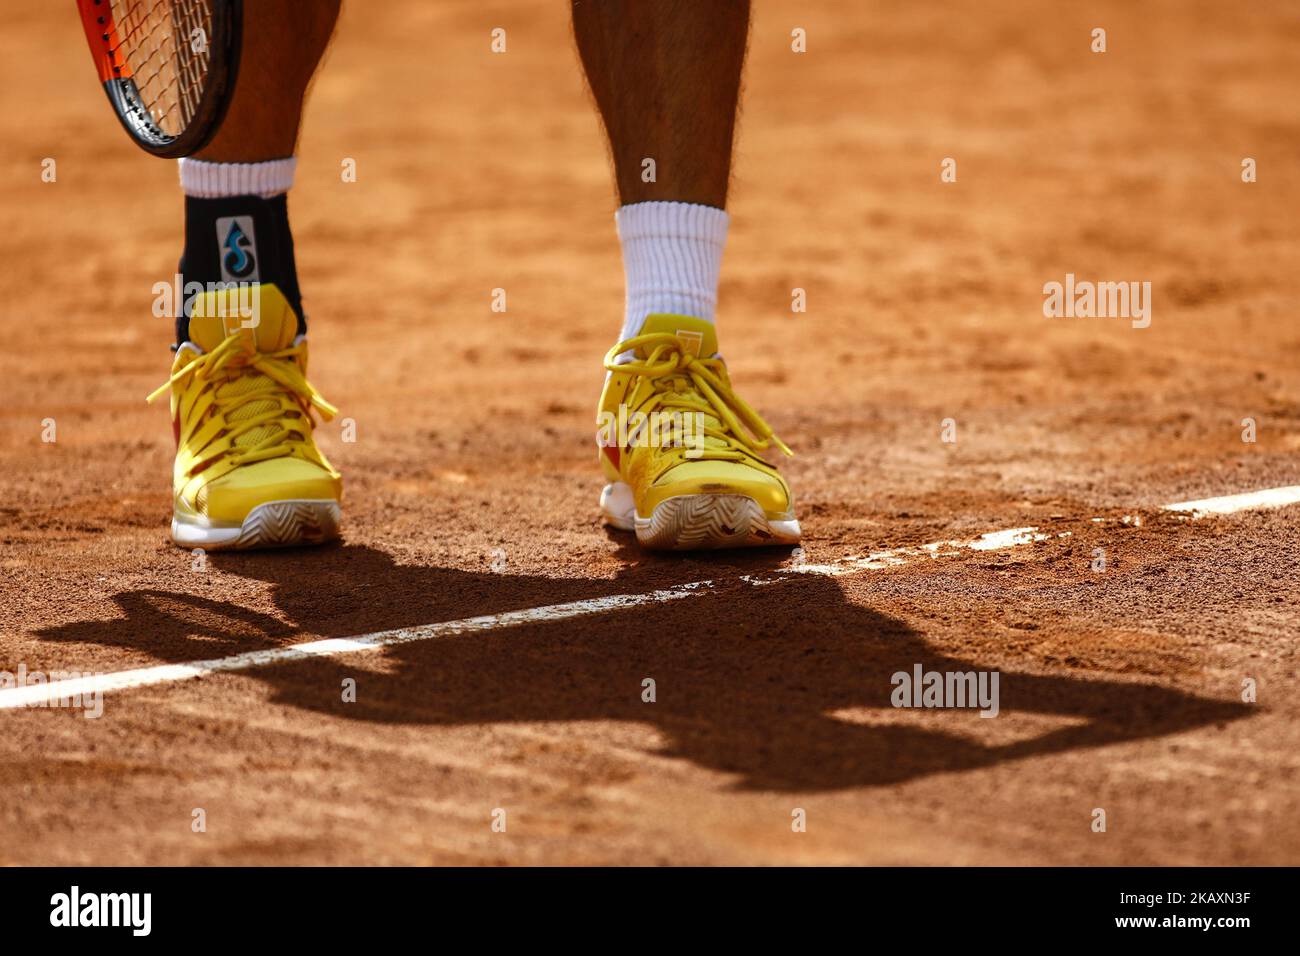 Betsy Trotwood estanque fingir Kei Nishikori from Japan Nike shoes during the Barcelona Open Banc Sabadell  66 Trofeo Conde de Godo at Reial Club Tenis Barcelona on 24 of April of  2018 in Barcelona. (Photo by